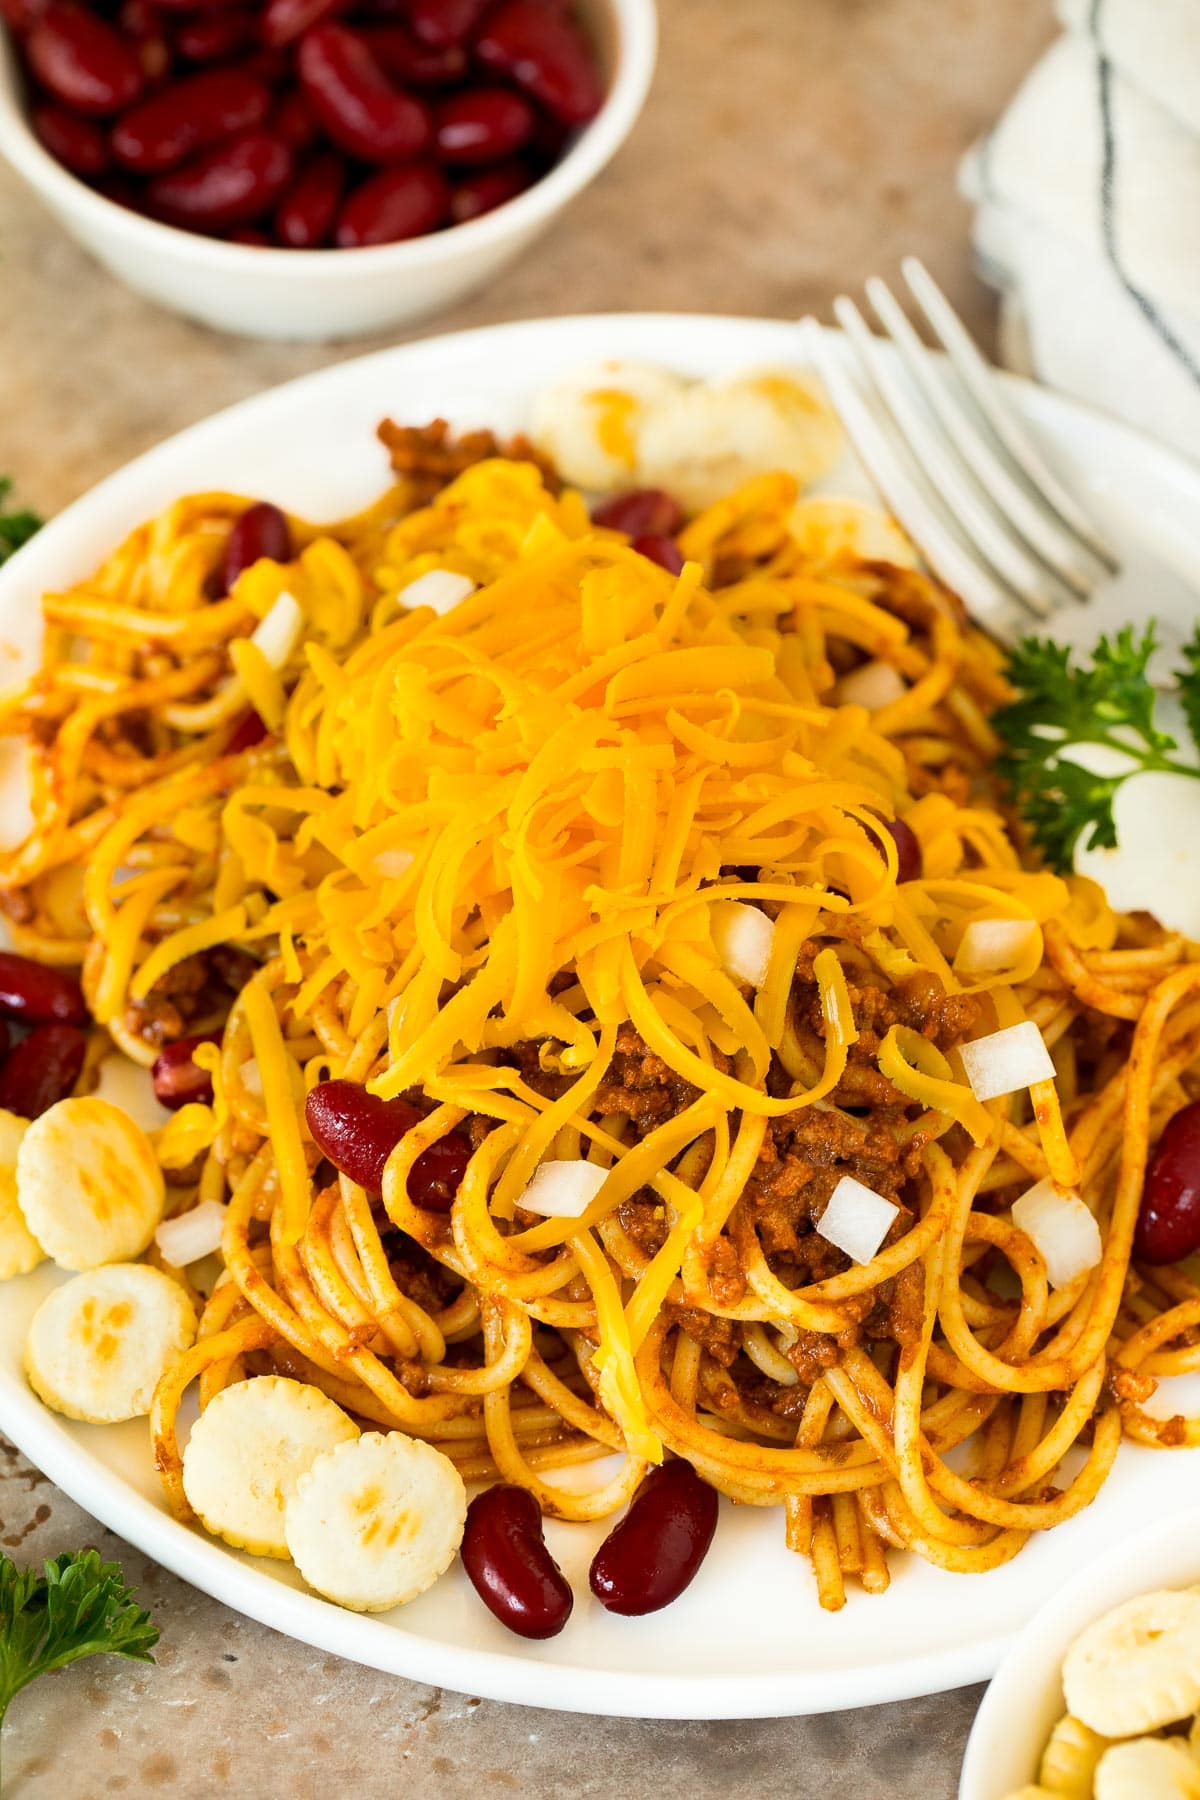 A plate of spaghetti tossed with Cincinnati chili and served with beans, oyster crackers and cheese.